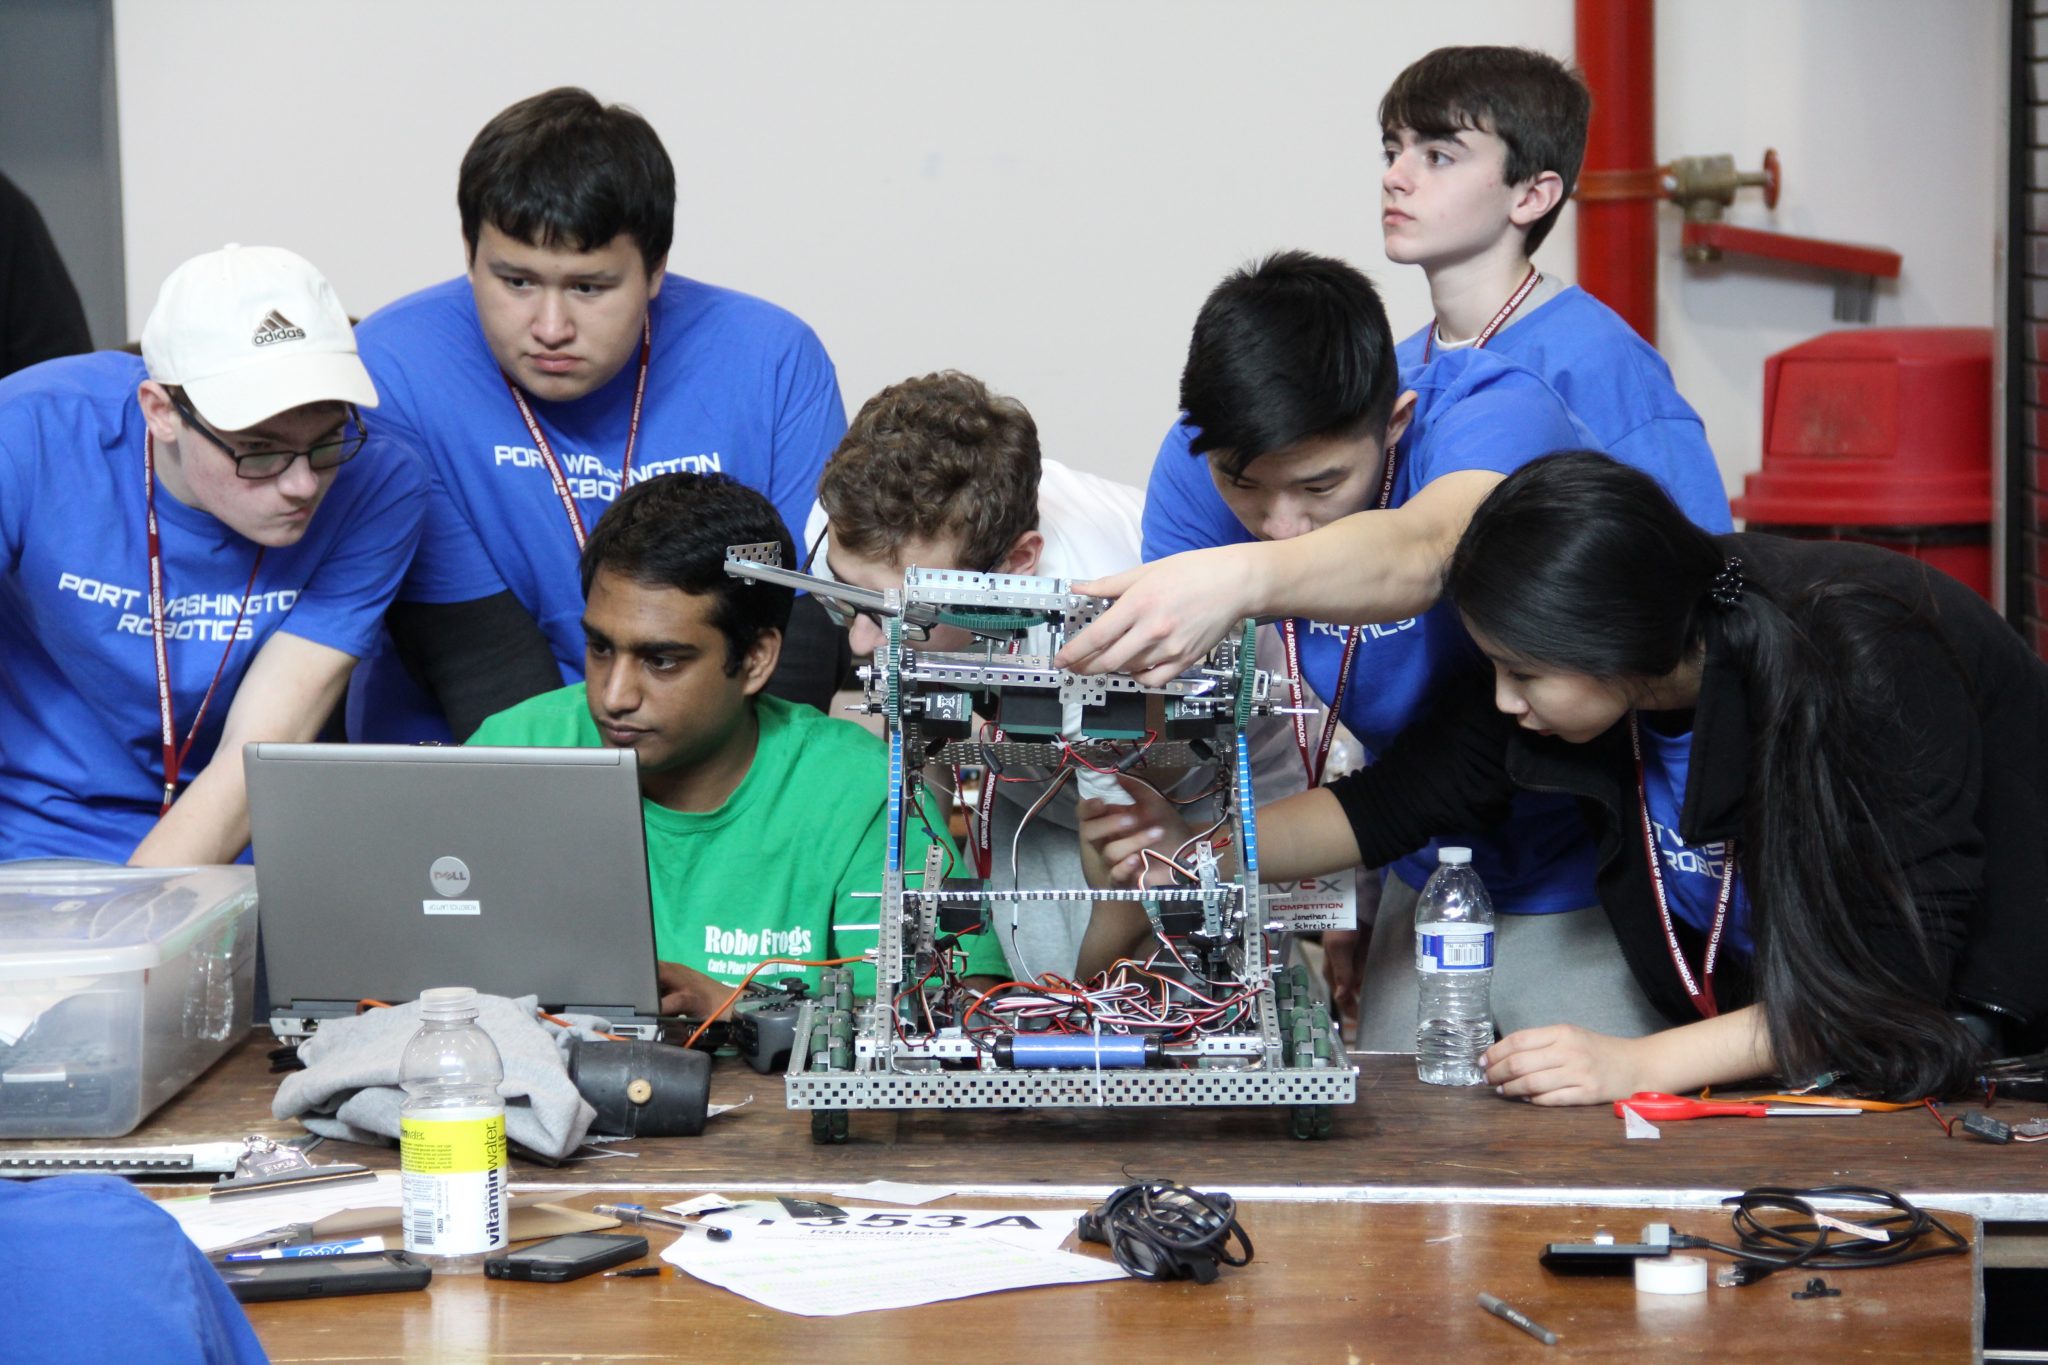 Vaughn Robotics Team Host Competitions for High School and College Teams